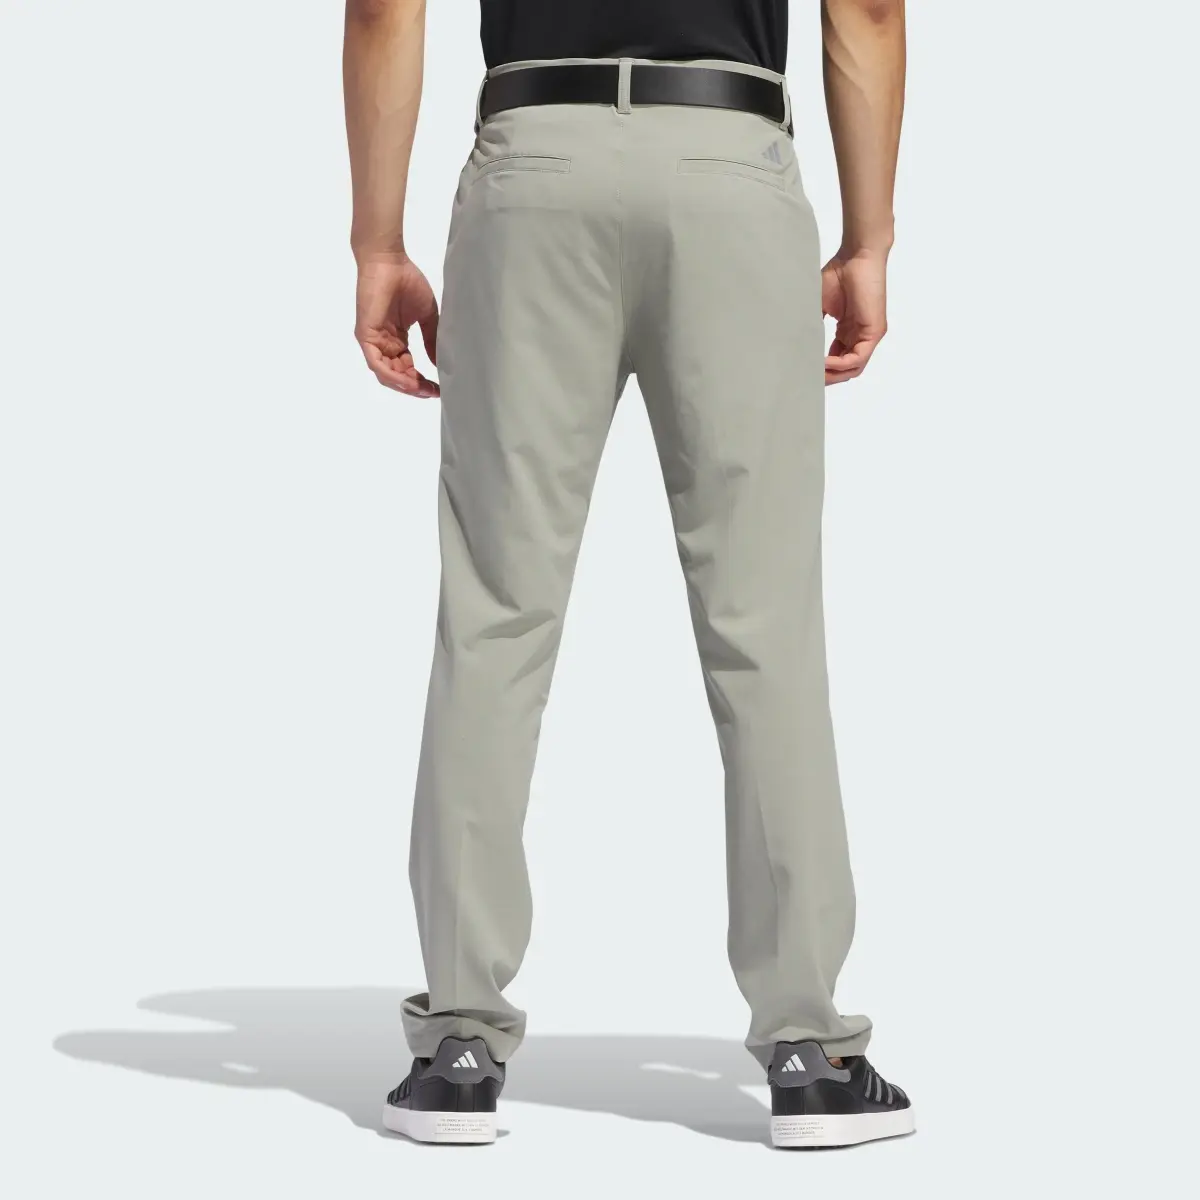 Adidas Ultimate365 Tapered Golf Trousers. 2